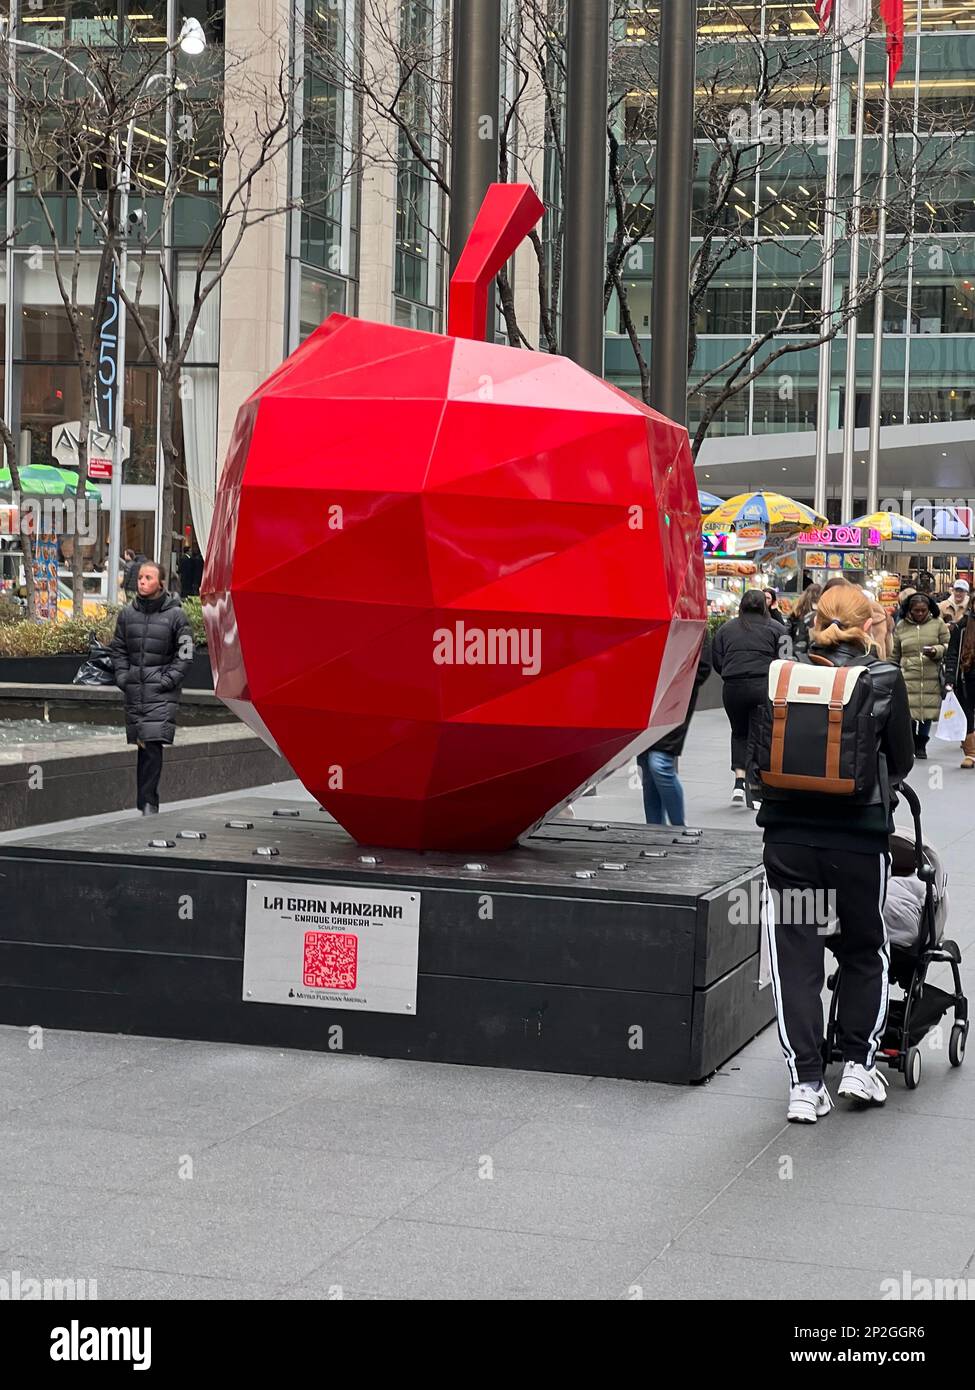 'La Gran Manzana” by Enrique Cabrera  sculptor. La Gran Manzana “The Big Apple” is the first and unique project created in homage to the city by international artist Enrique Cabrera in collaboration with Mitsui Fudosan America Inc., one of the most important real estate developers in the country and the major in Japan. Stock Photo